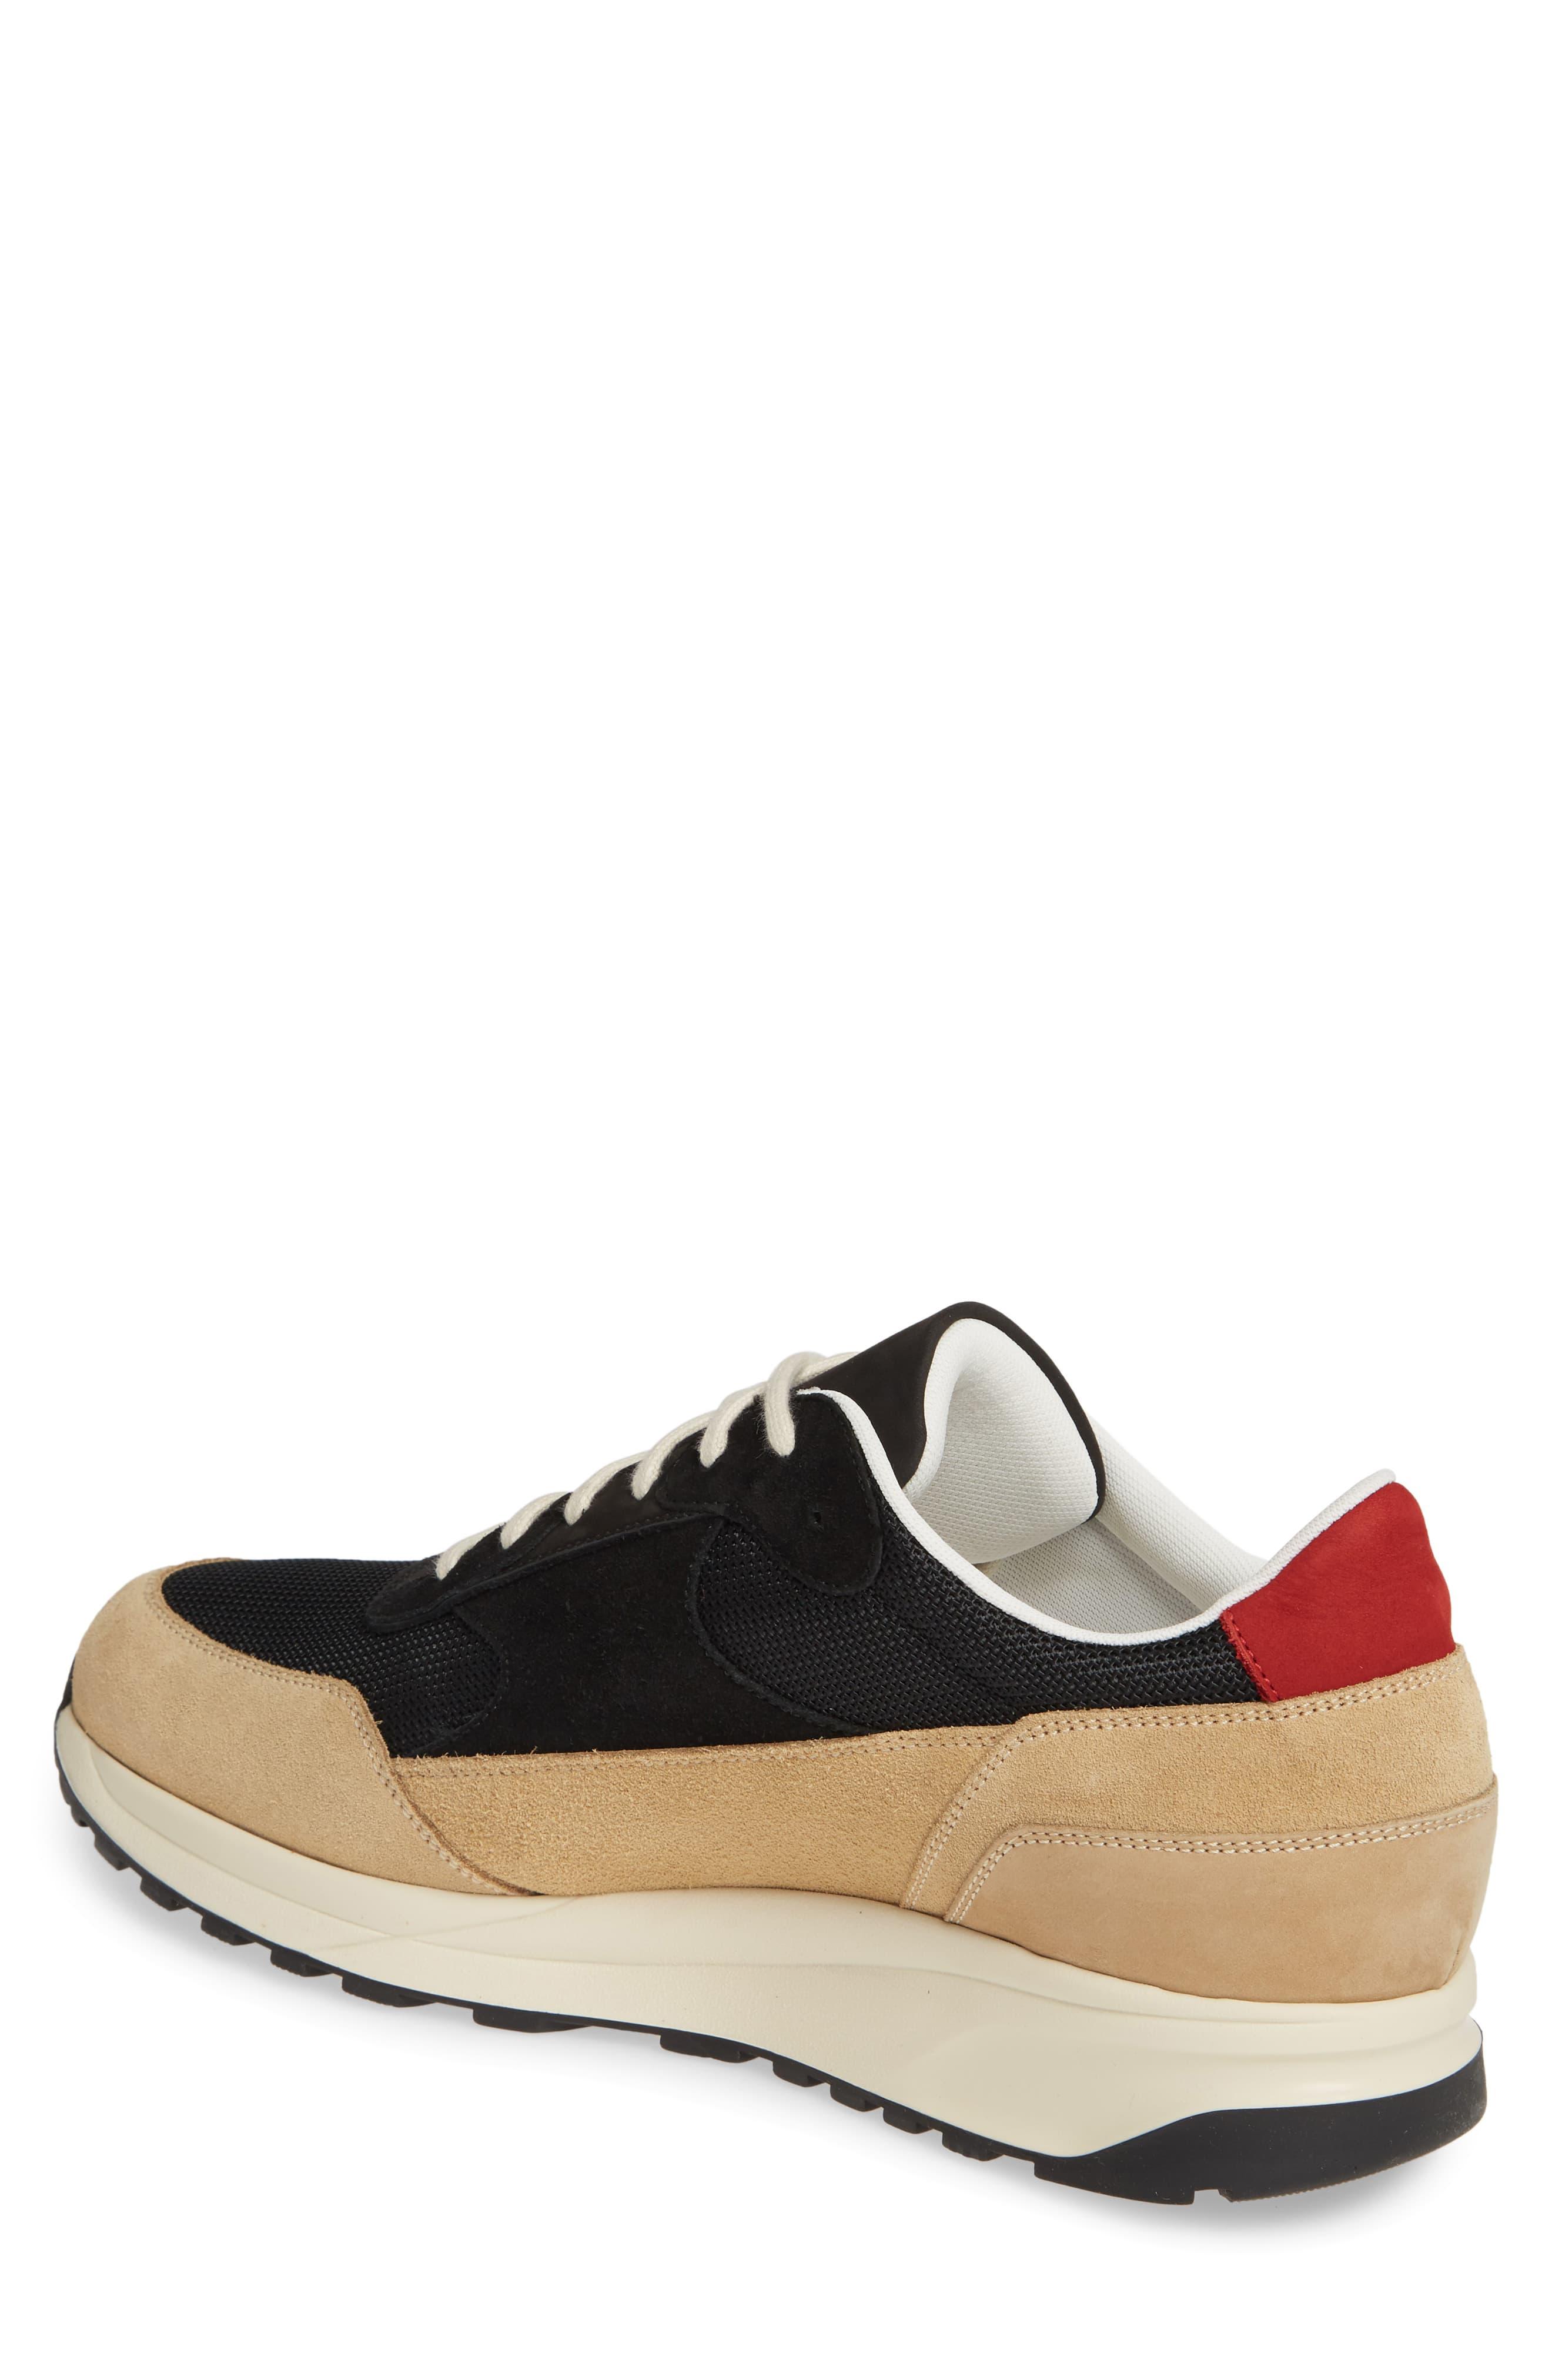 Common Projects Track Classic Sneaker in Black/Tan (Black) for Men - Lyst